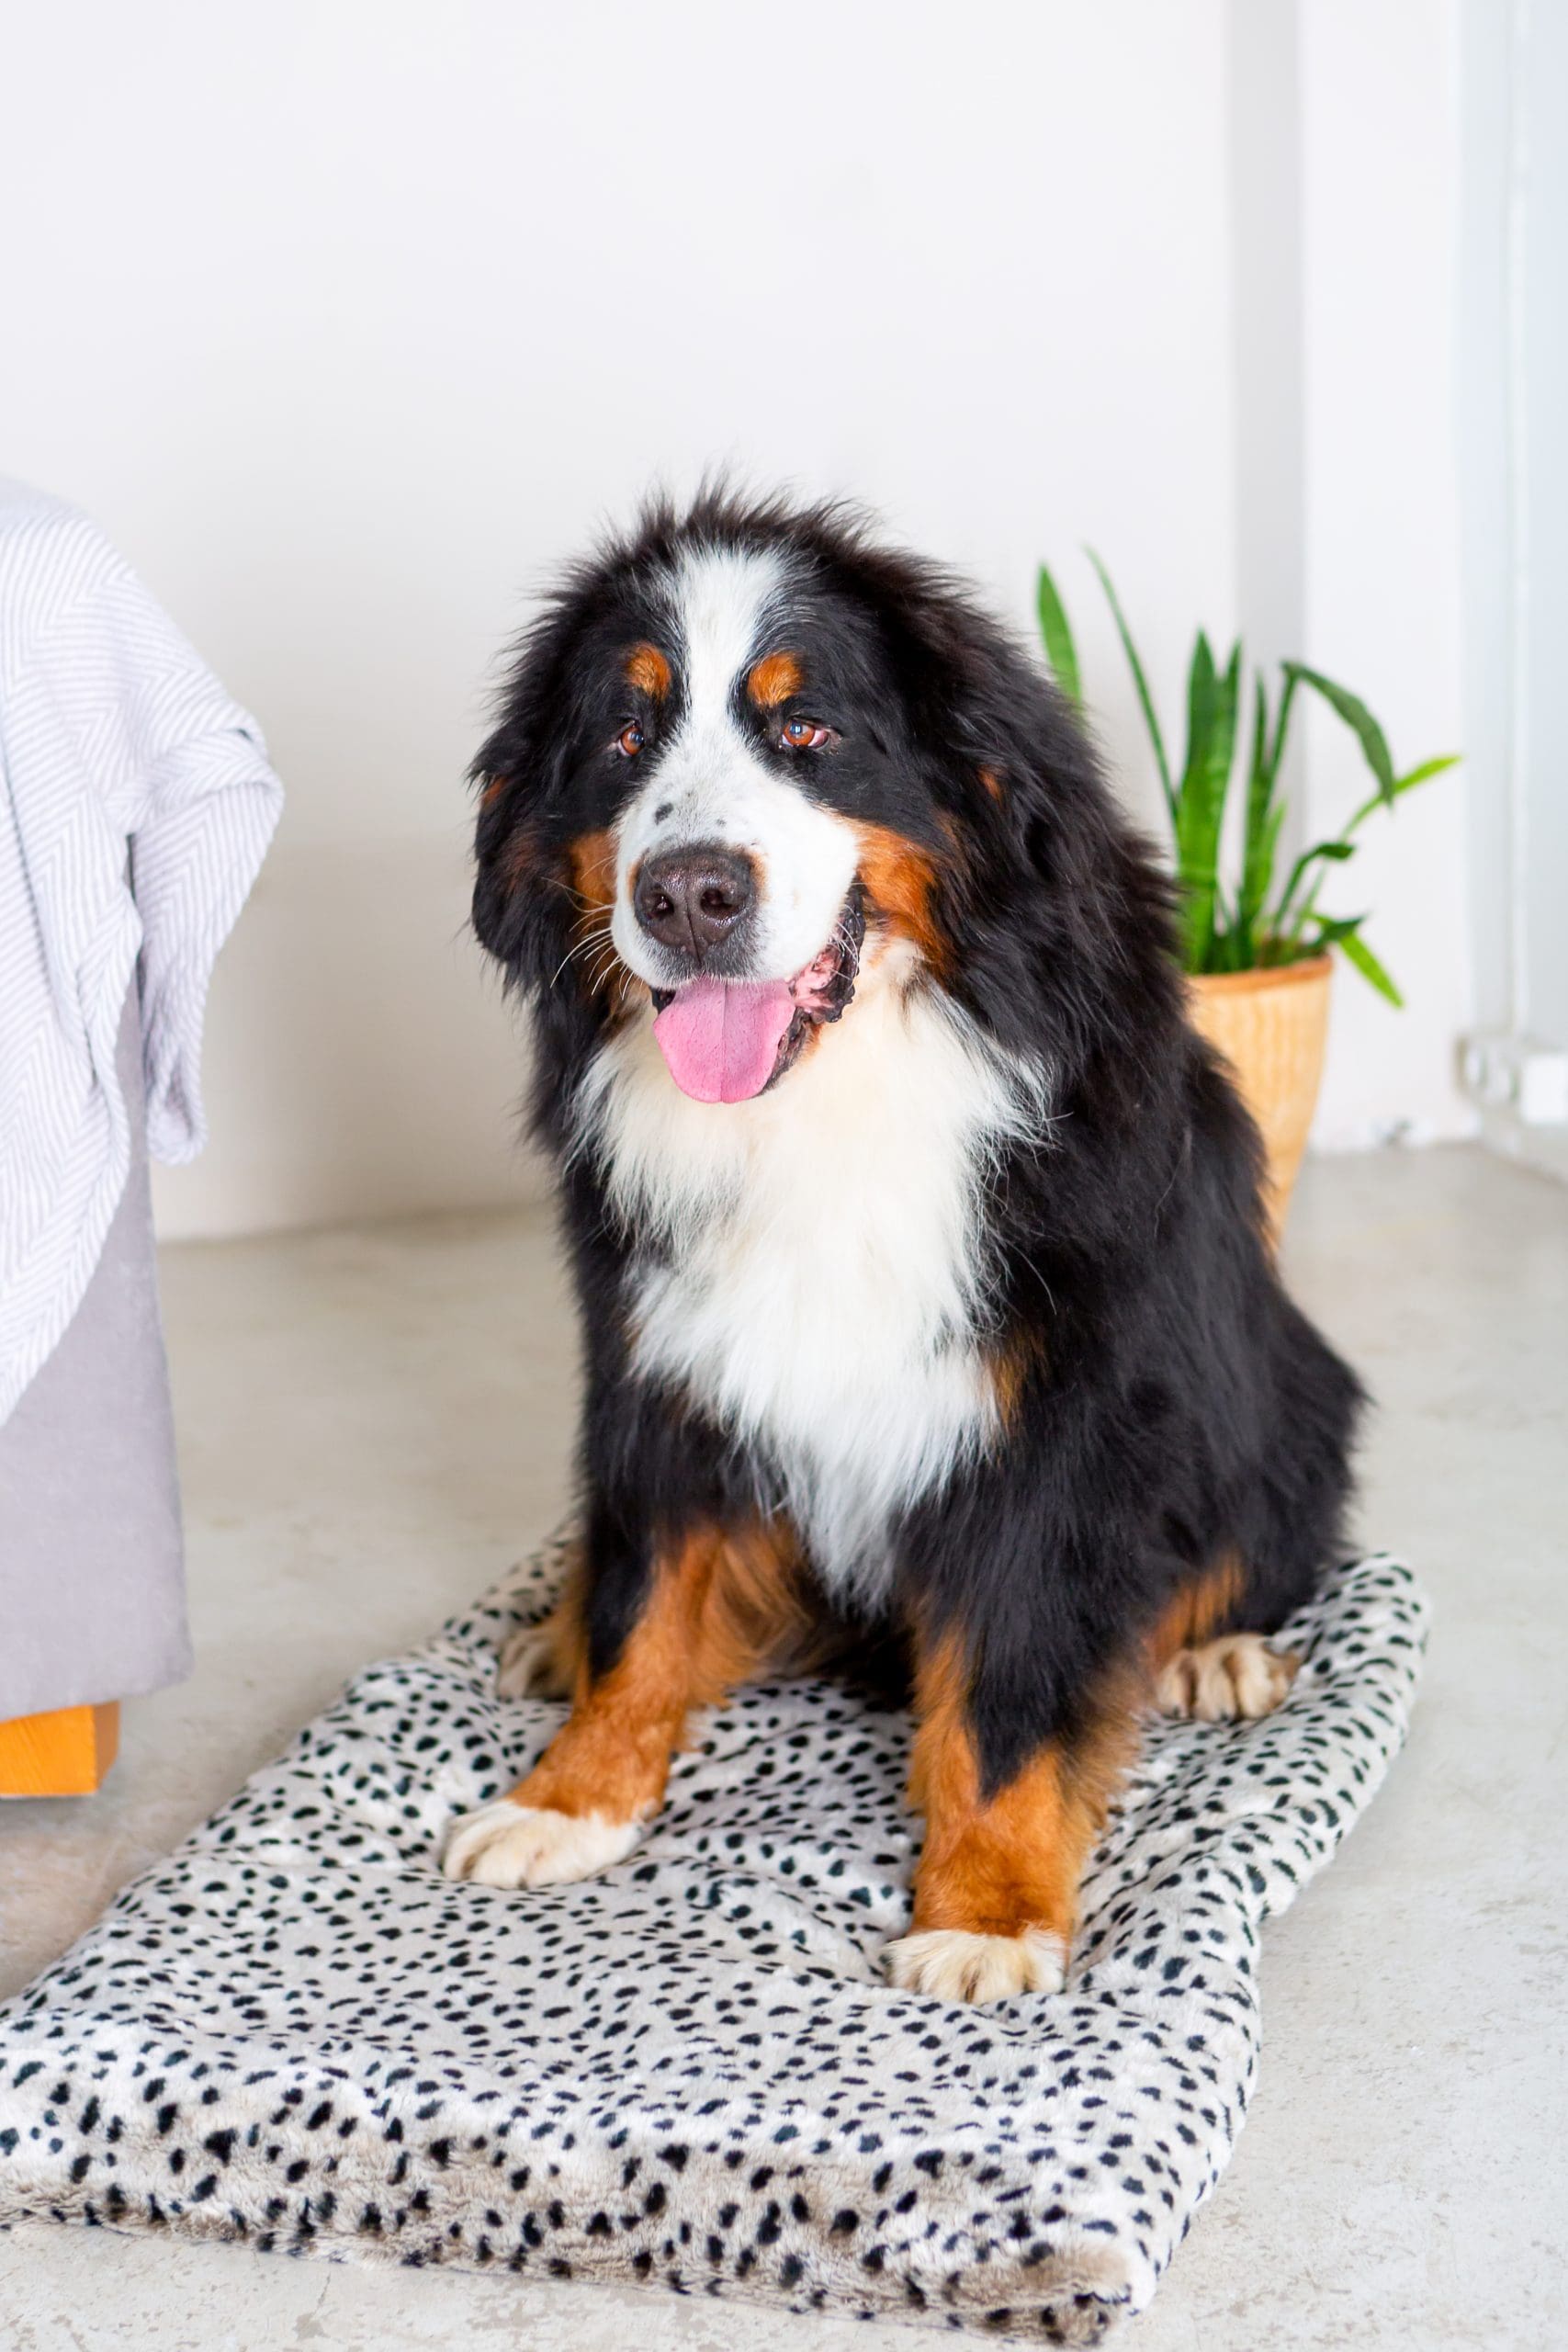 Bernese Mountain Dog on Dog Bed in House